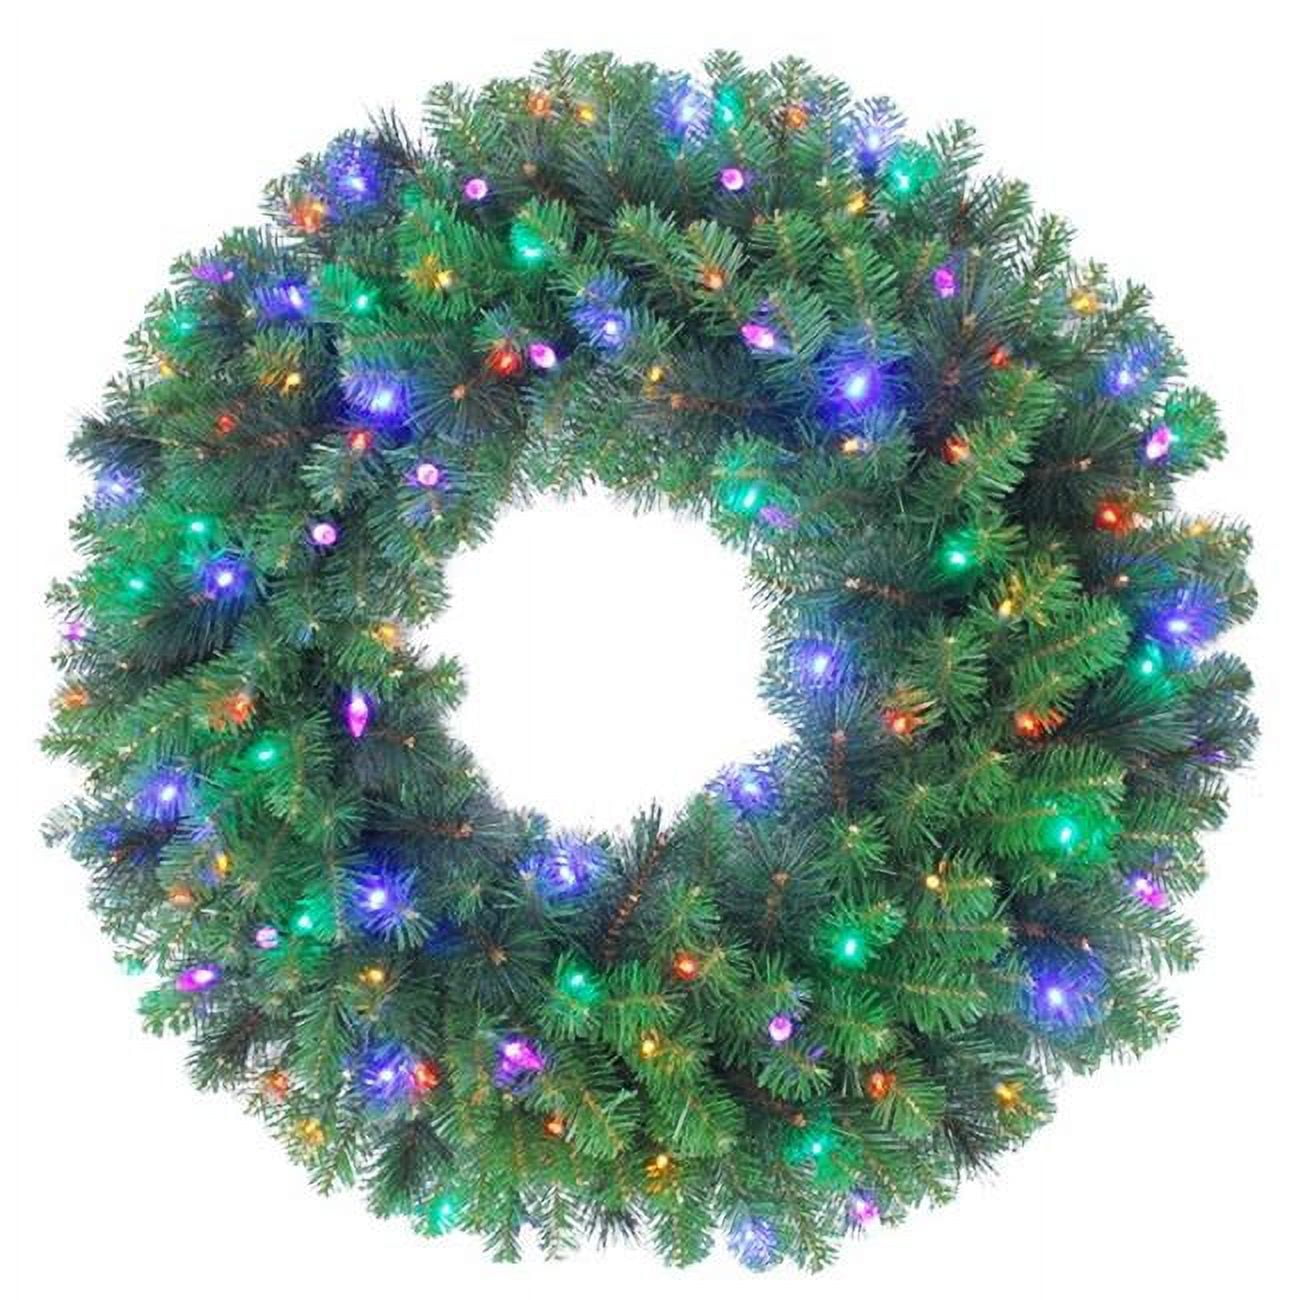 Picture of Celebrations 9016960 36 in. Dia. Mixed Pine Prelit Green LED Decorated Wreath, Multi Color - Case of 2